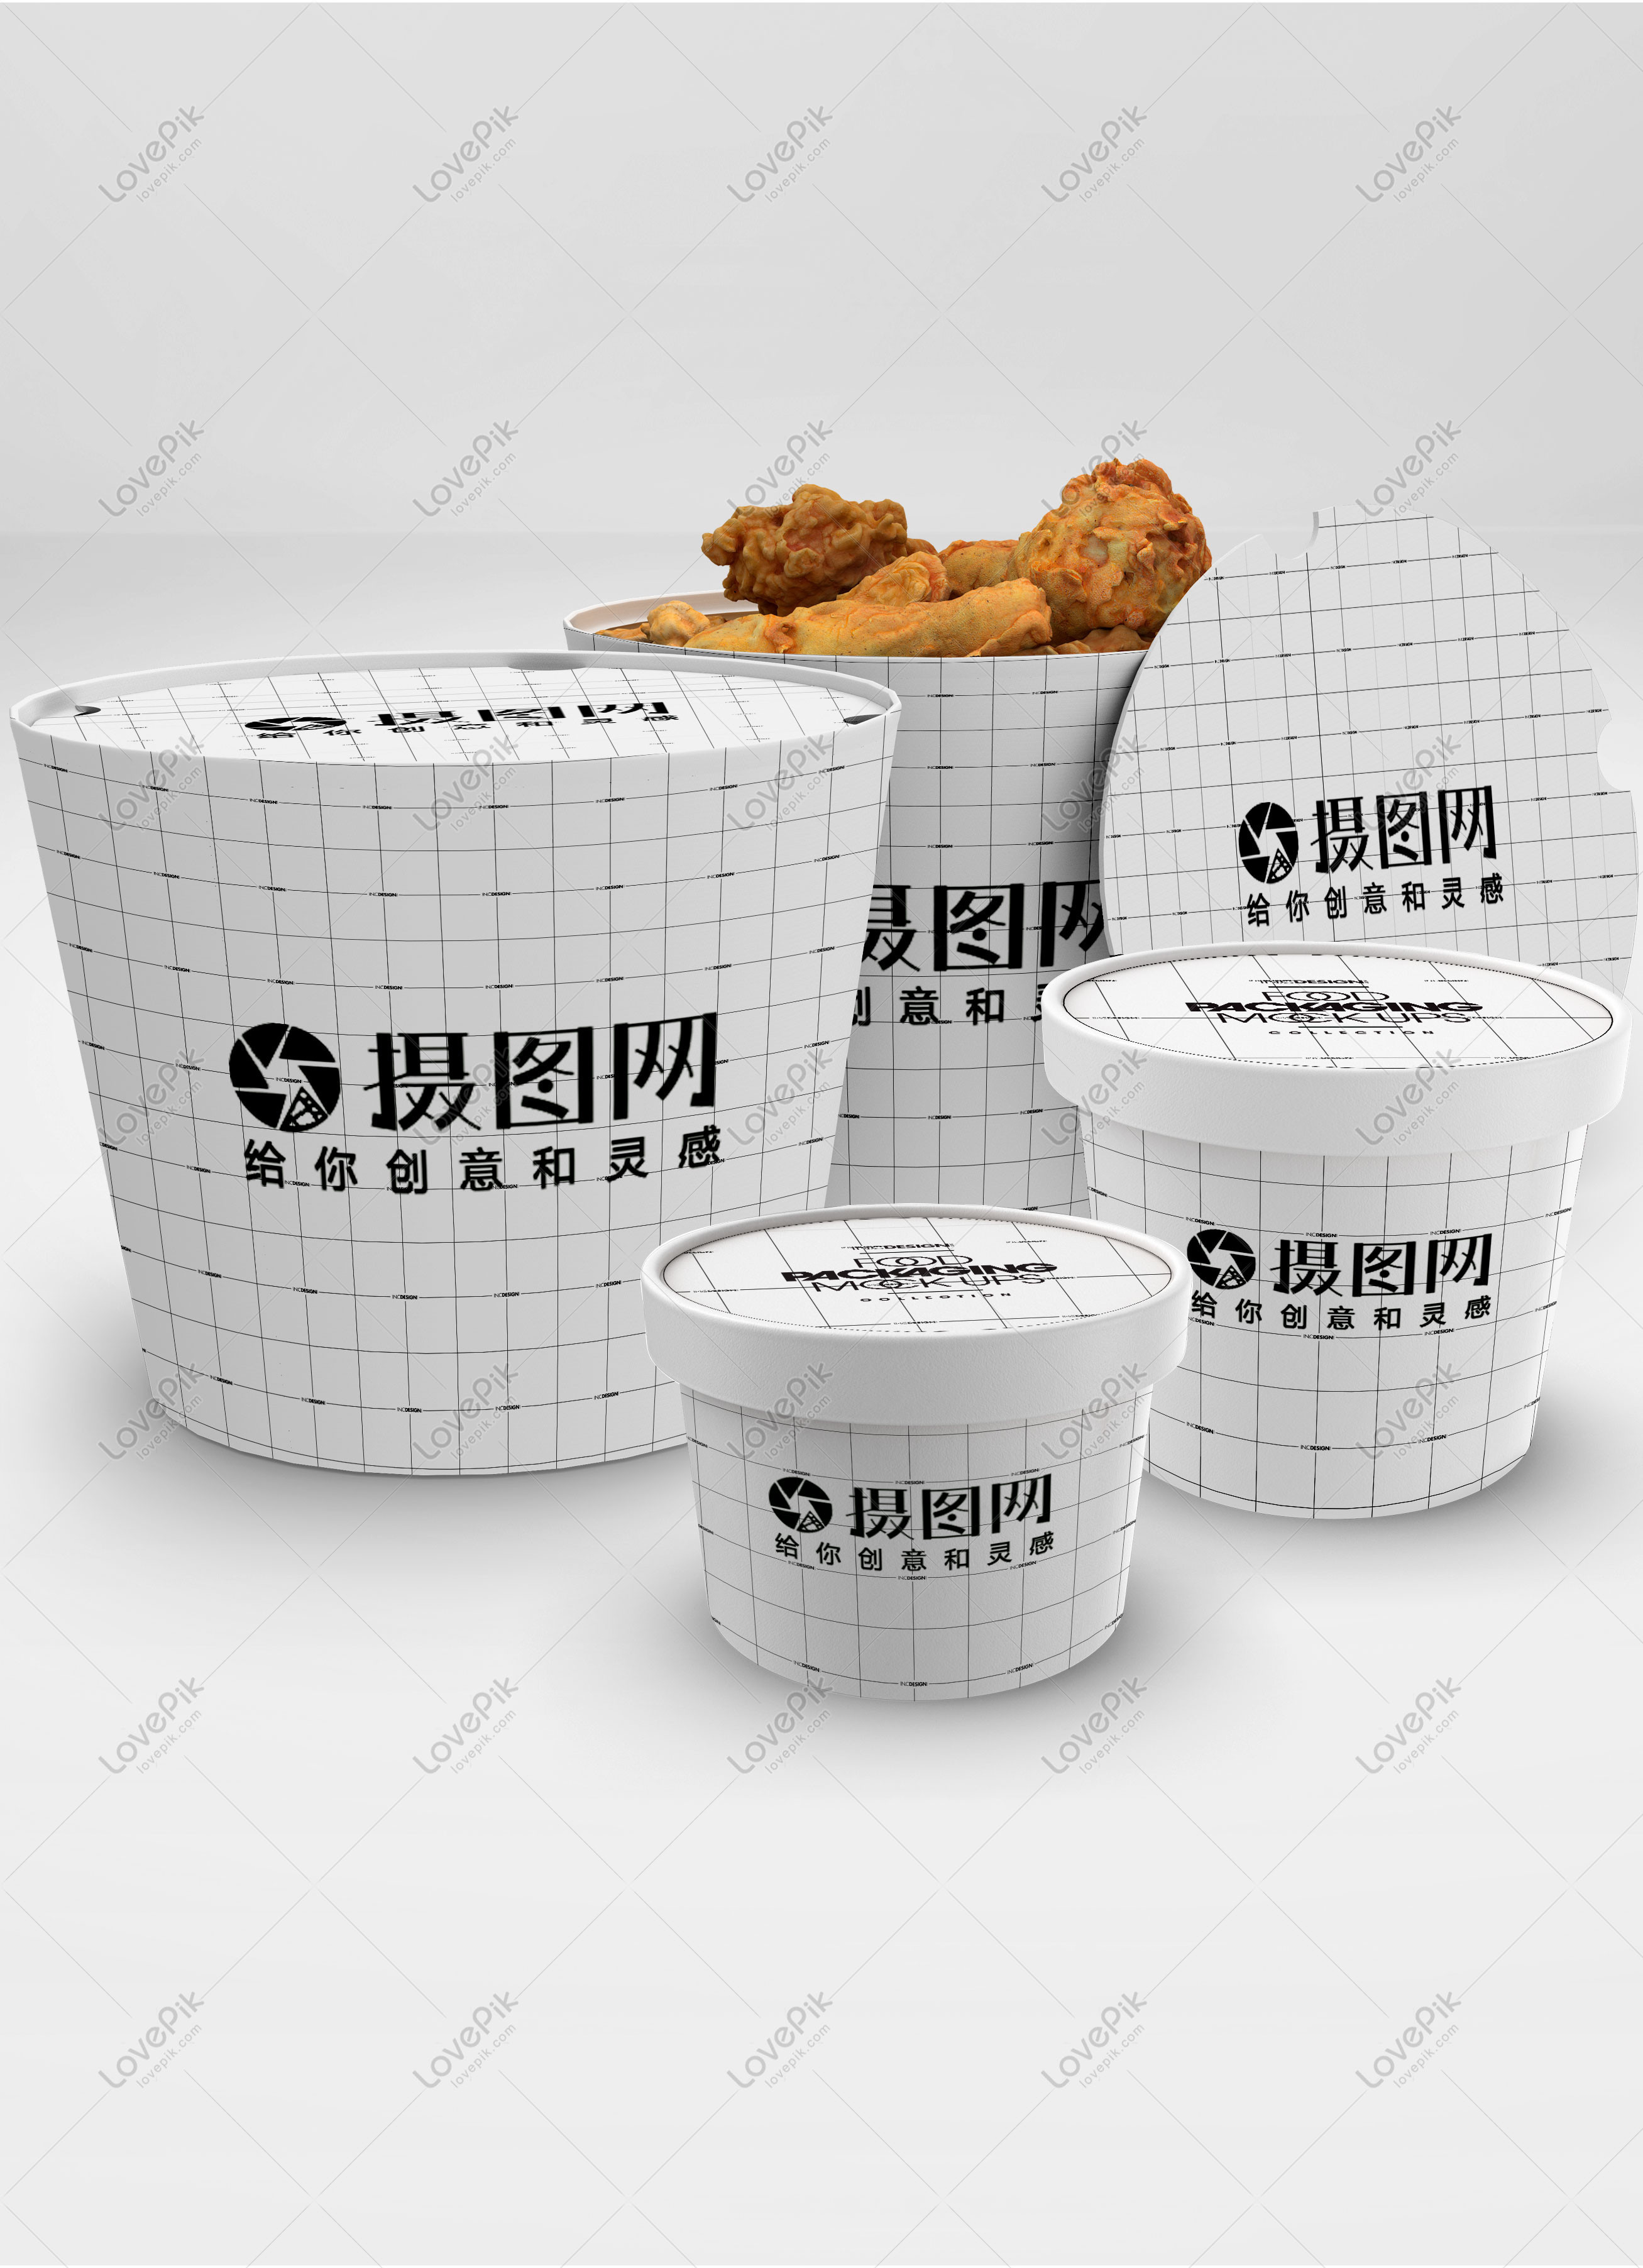 Download Fast food box packaging mockup template image_picture free download 400724843_lovepik.com